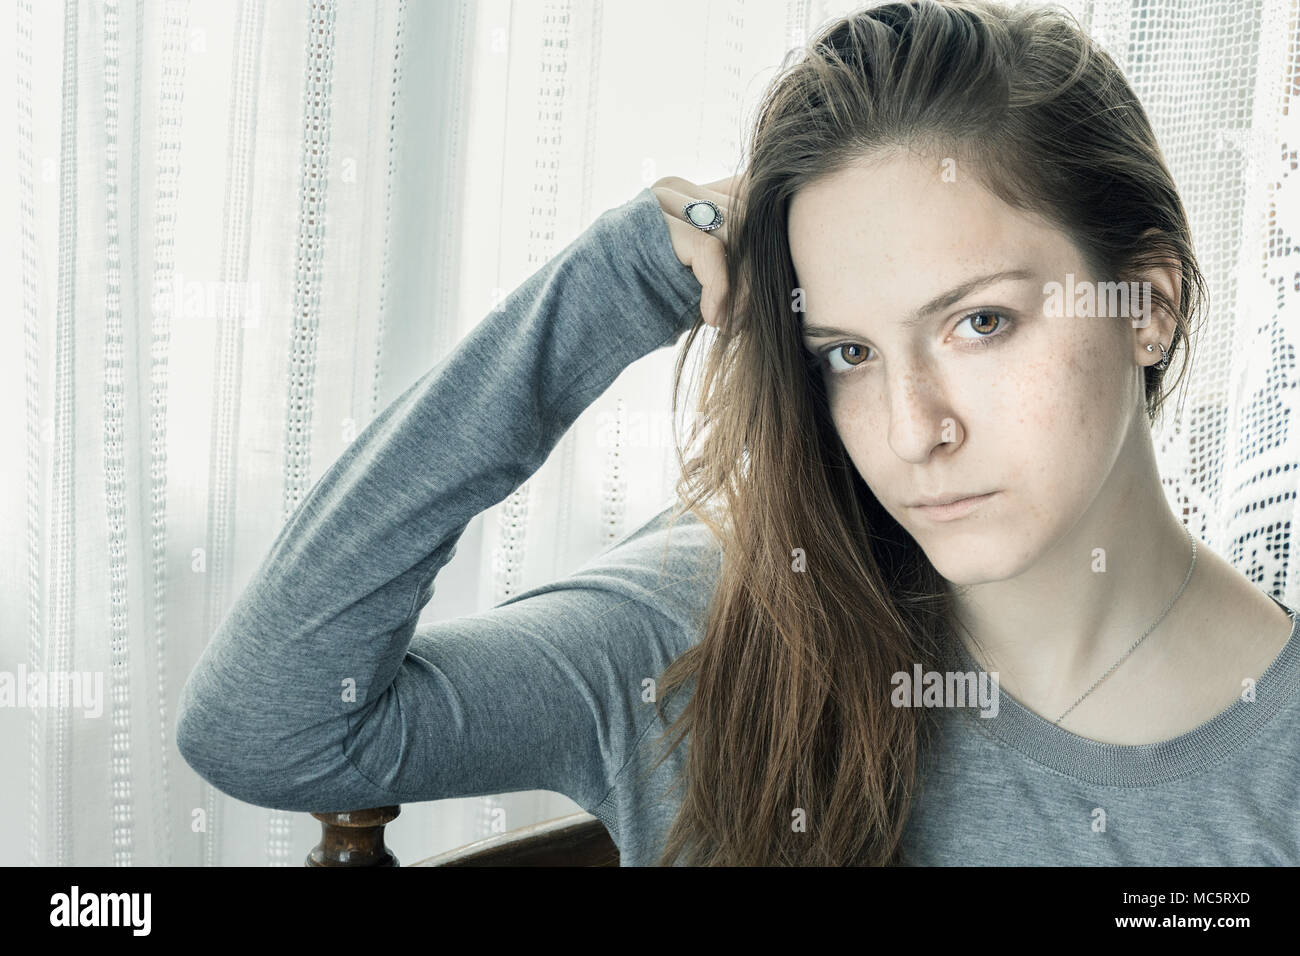 Teenager girl sitting at home, with her hand on the head looking camera serious, concerned. Stock Photo